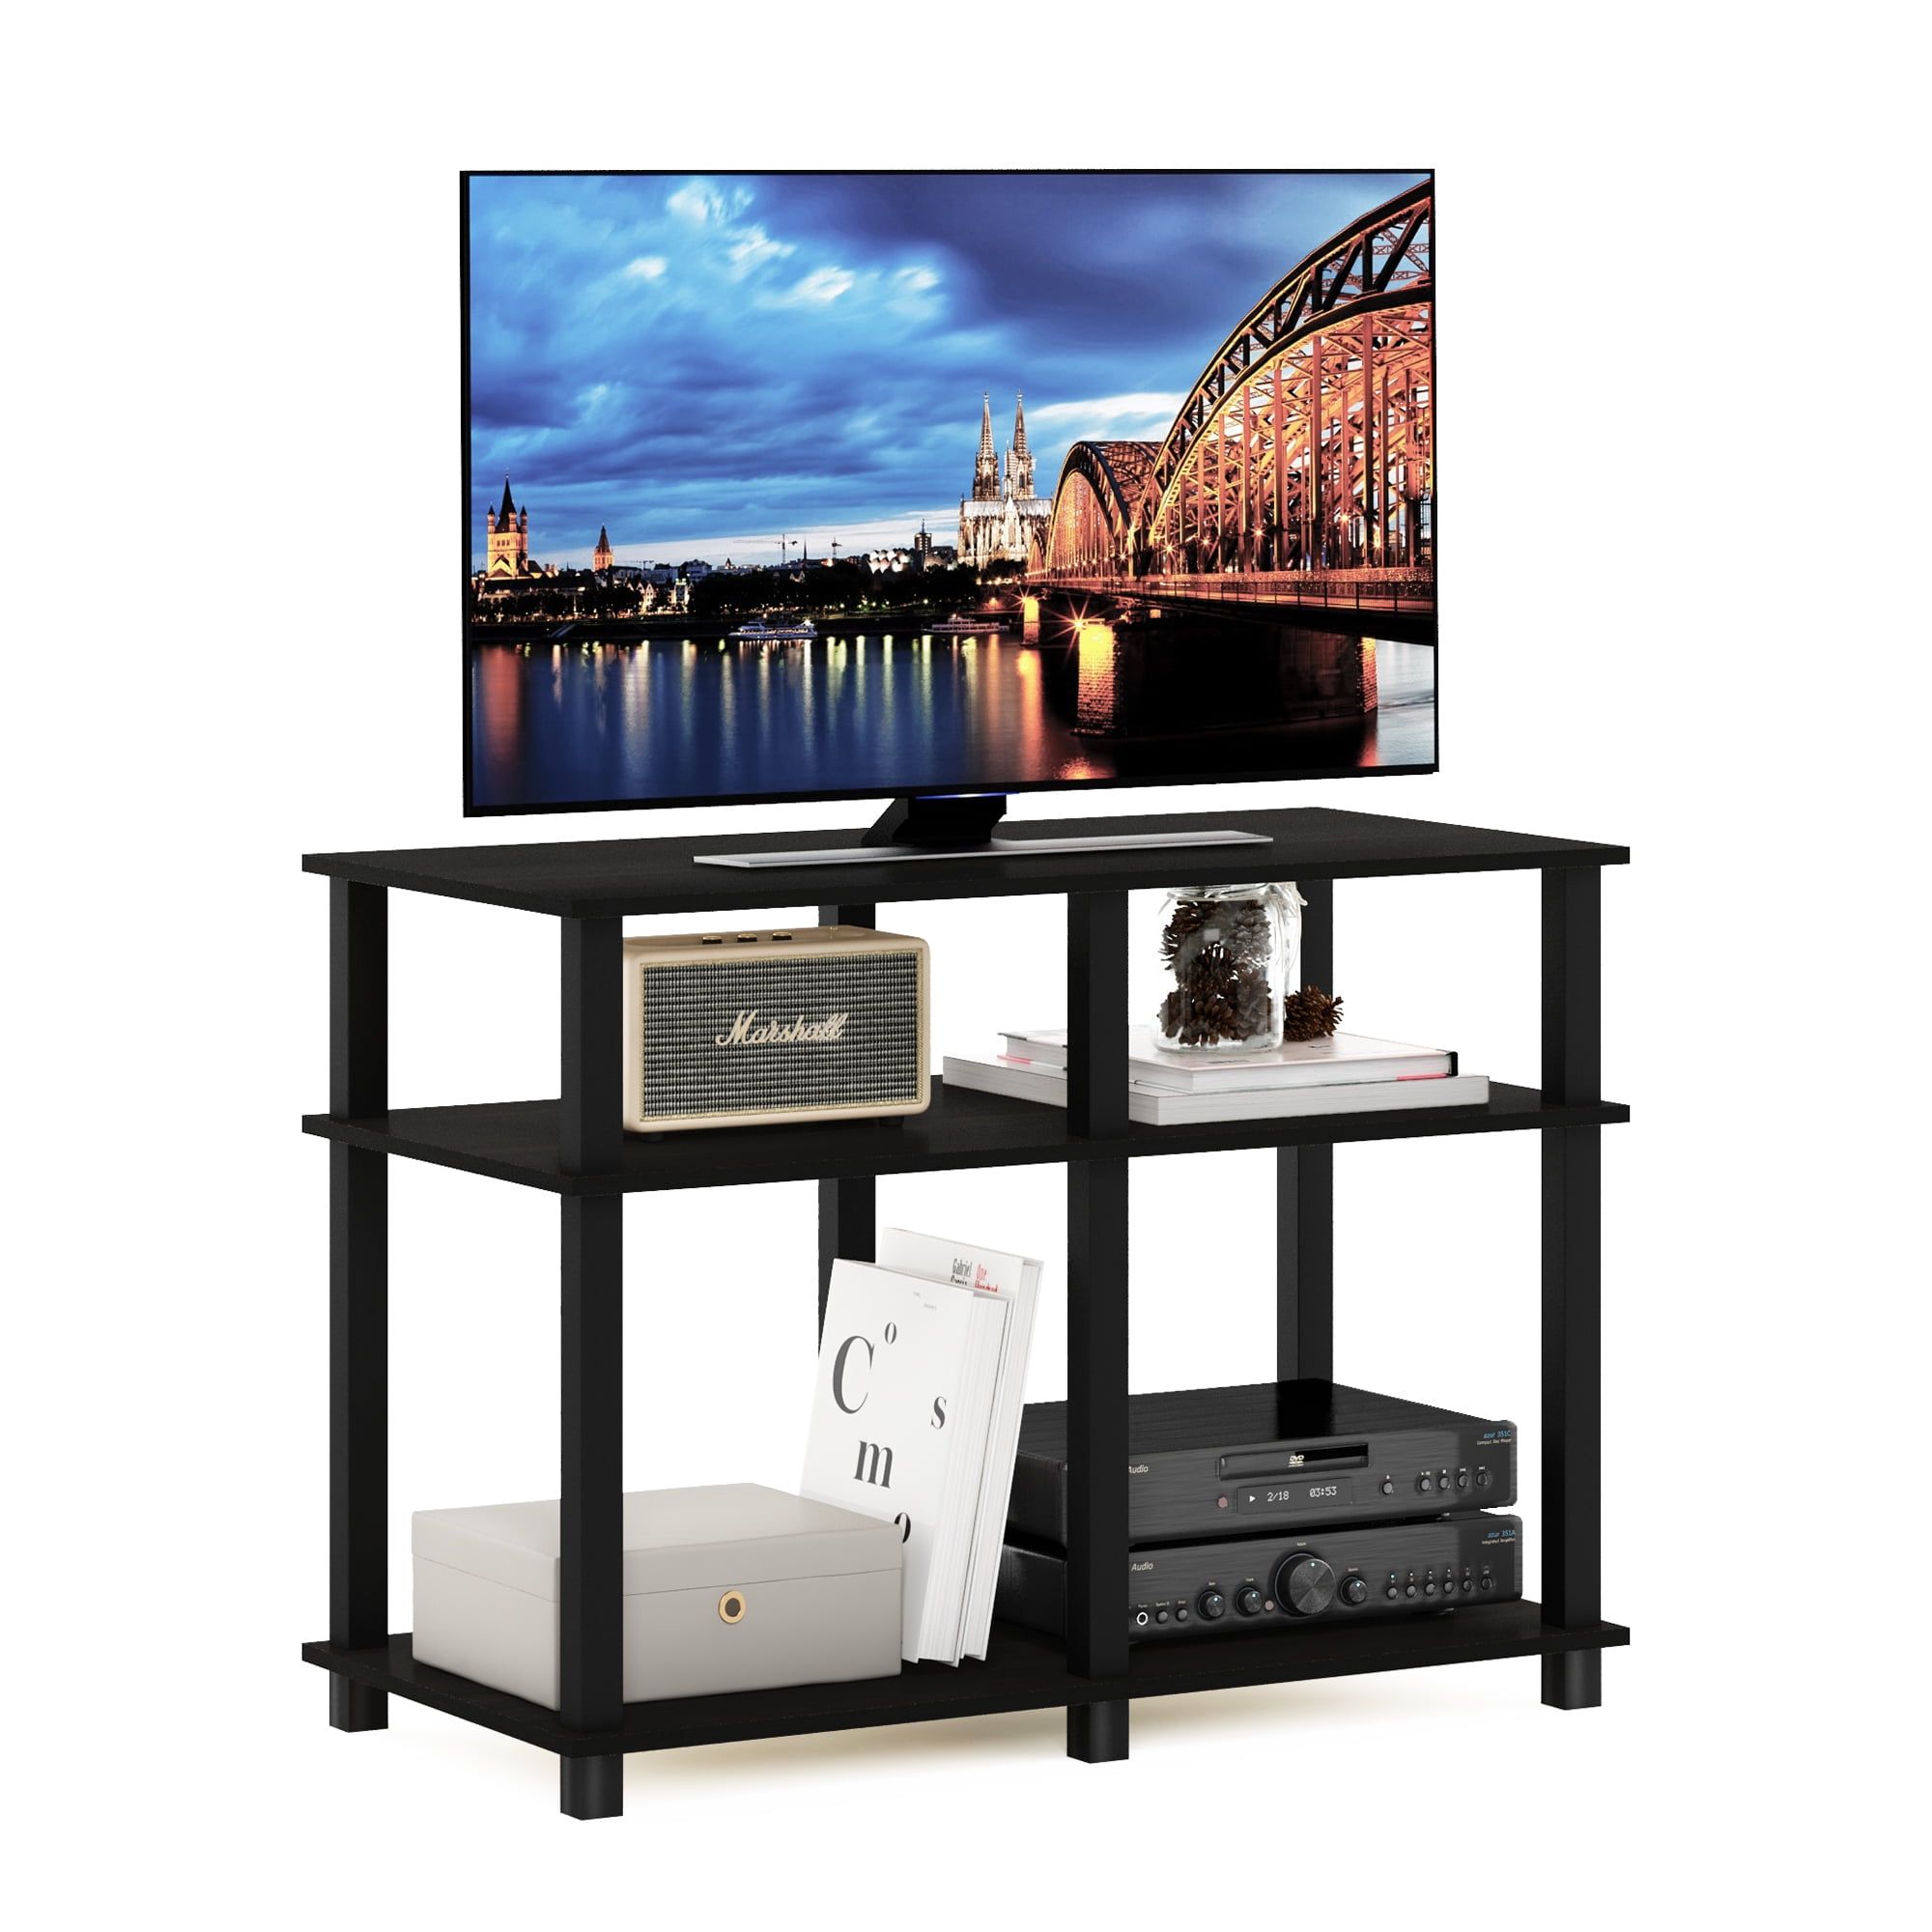 Furinno Romain Turn N Tube Tv Stand For Tv Up To 40 Inch, Espresso Inside Romain Stands For Tvs (Gallery 1 of 20)